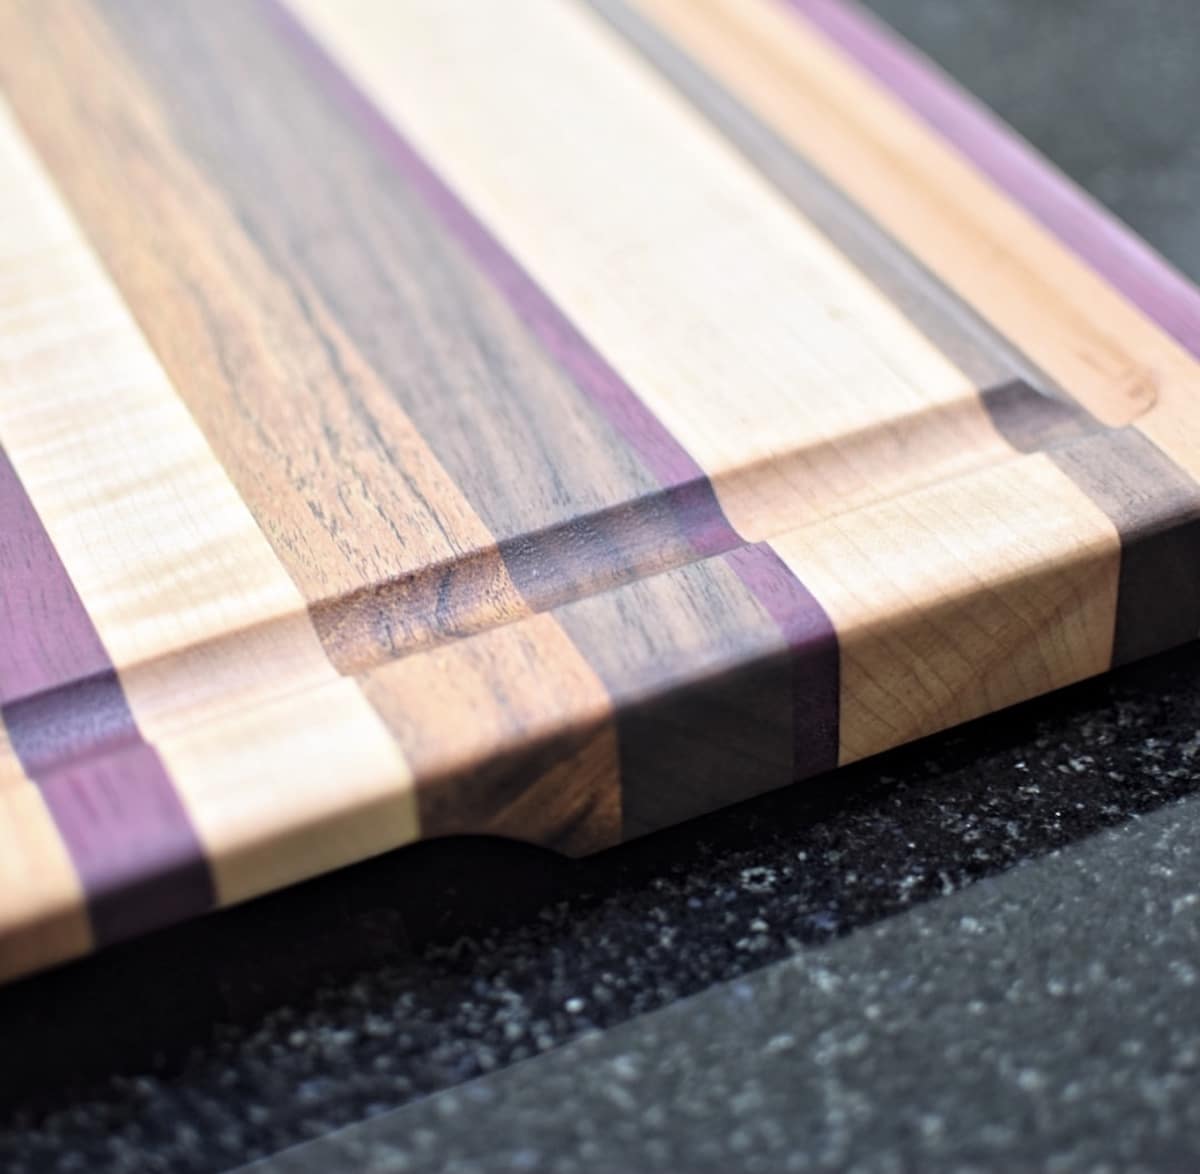 Best Tips and Tricks for Making Your Own DIY Cutting Board